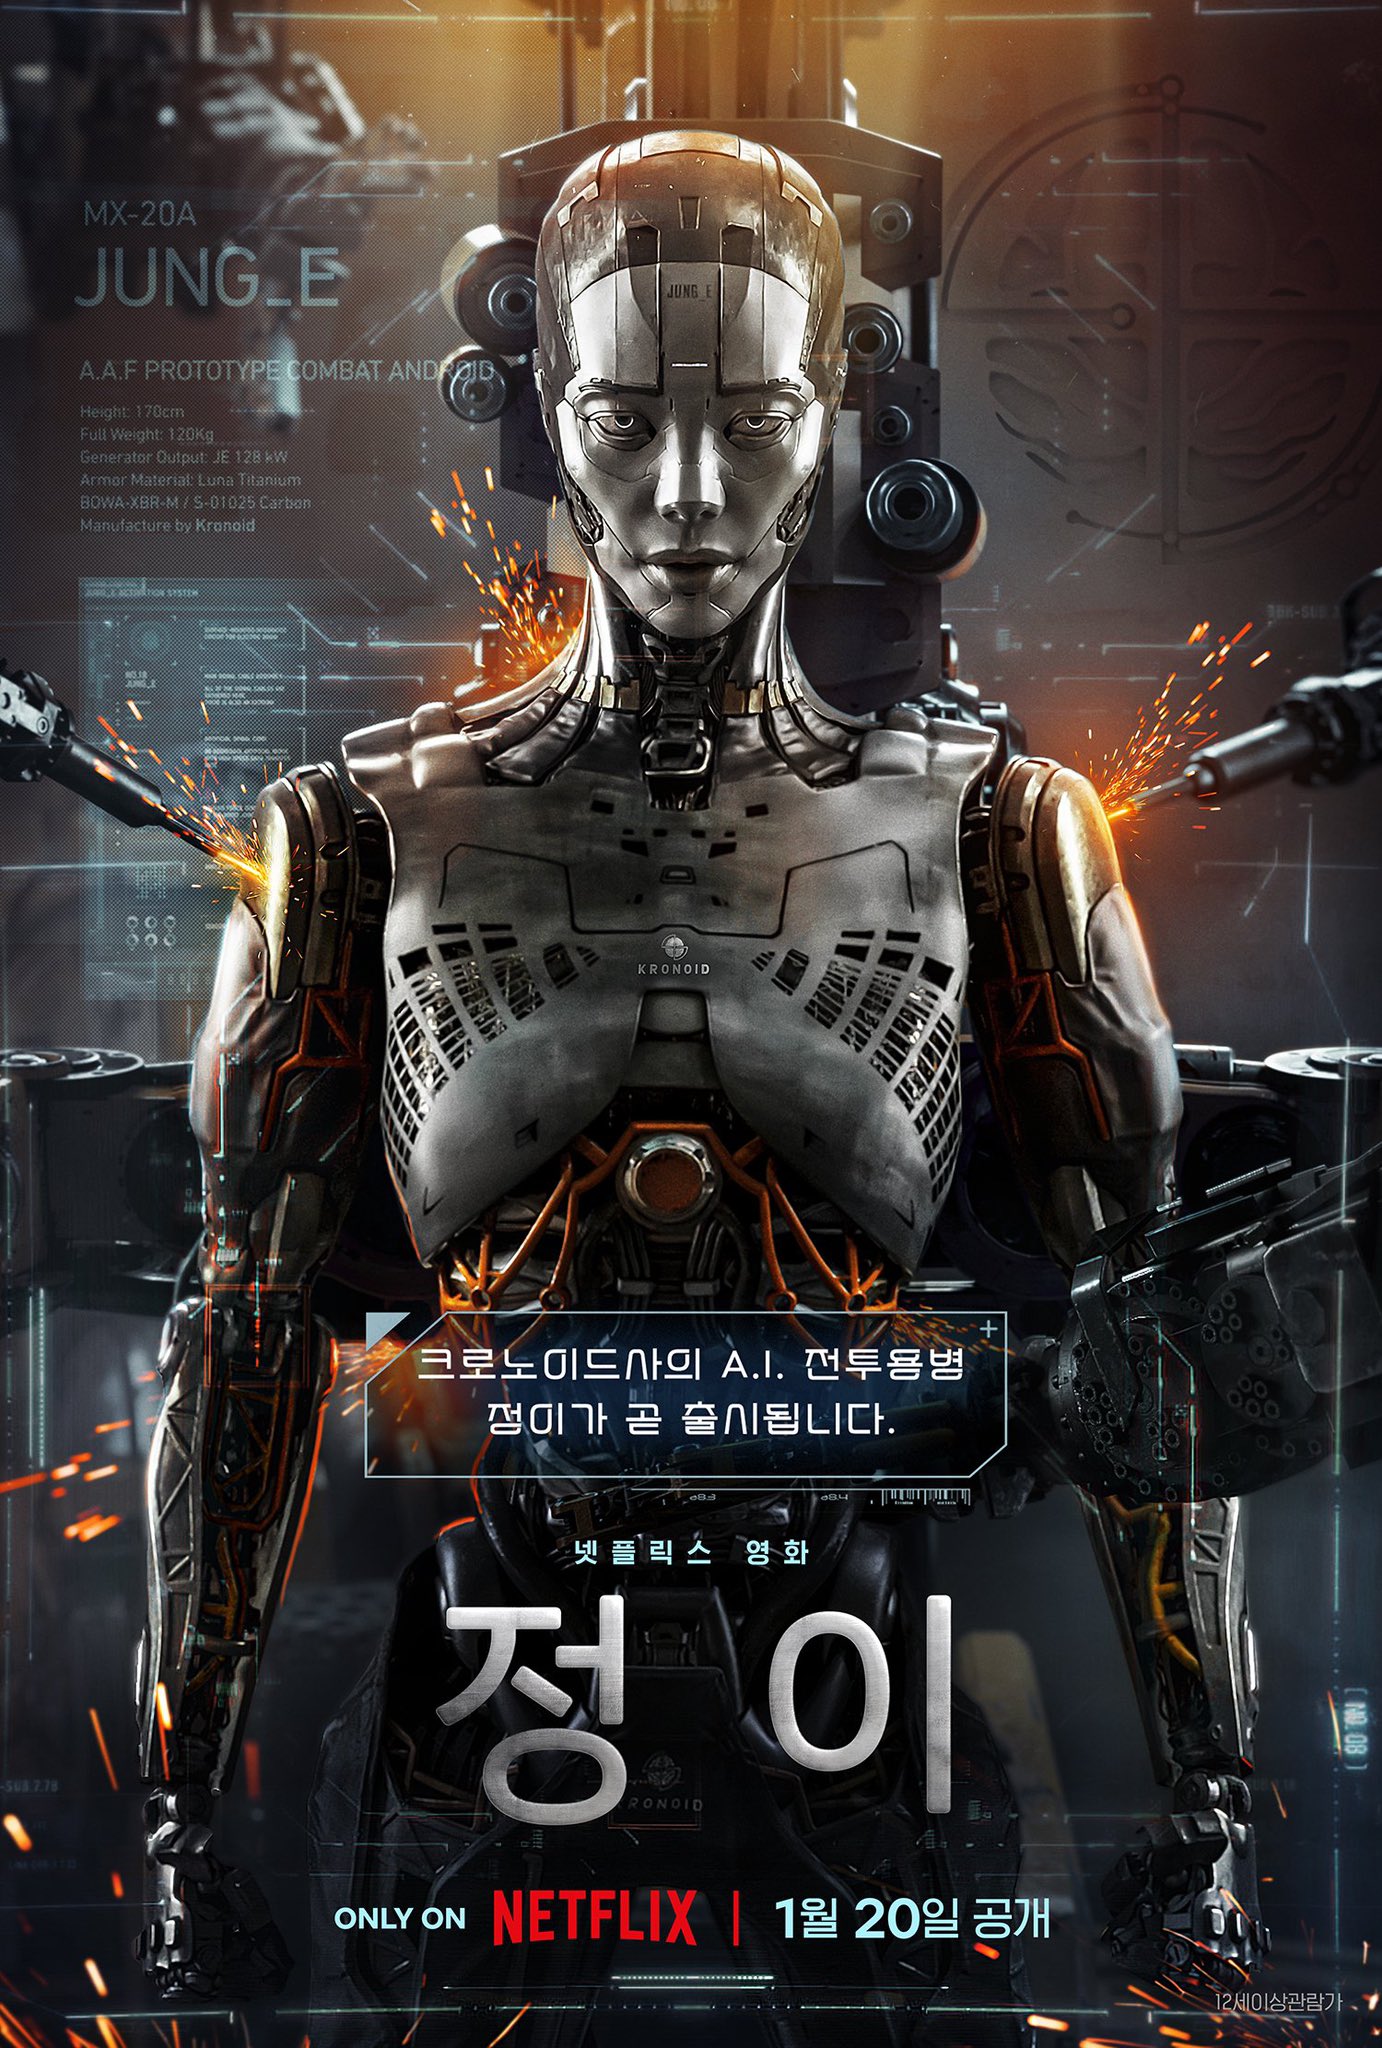 The new trailer for JUNG_E provides us with our first glimpse at the high-tech surroundings of the 22nd Century